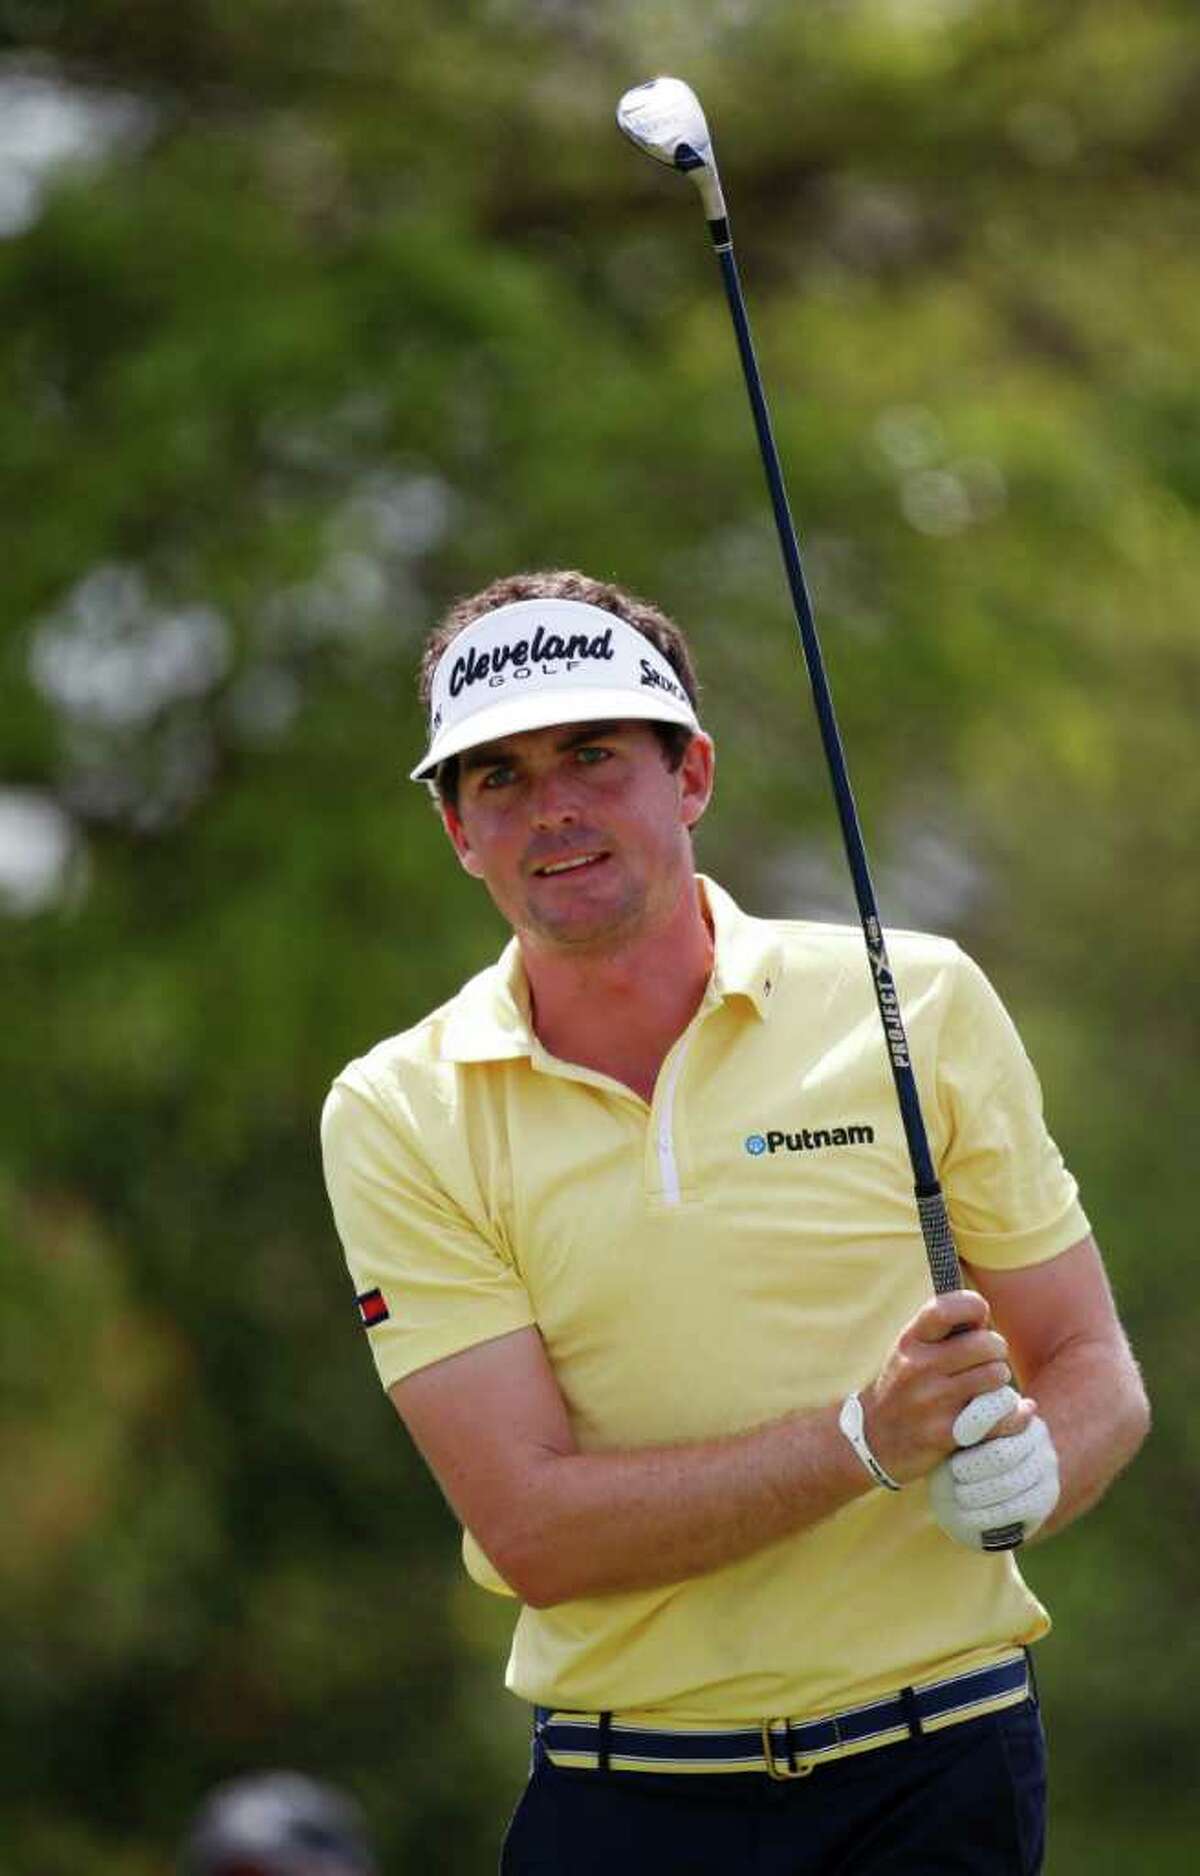 Keegan Bradley watches his shot from the fifth tee during the second round of the Cadillac Championship golf tournament, Friday, March 9, 2012, in Doral, Fla. (AP Photo/Wilfredo Lee)